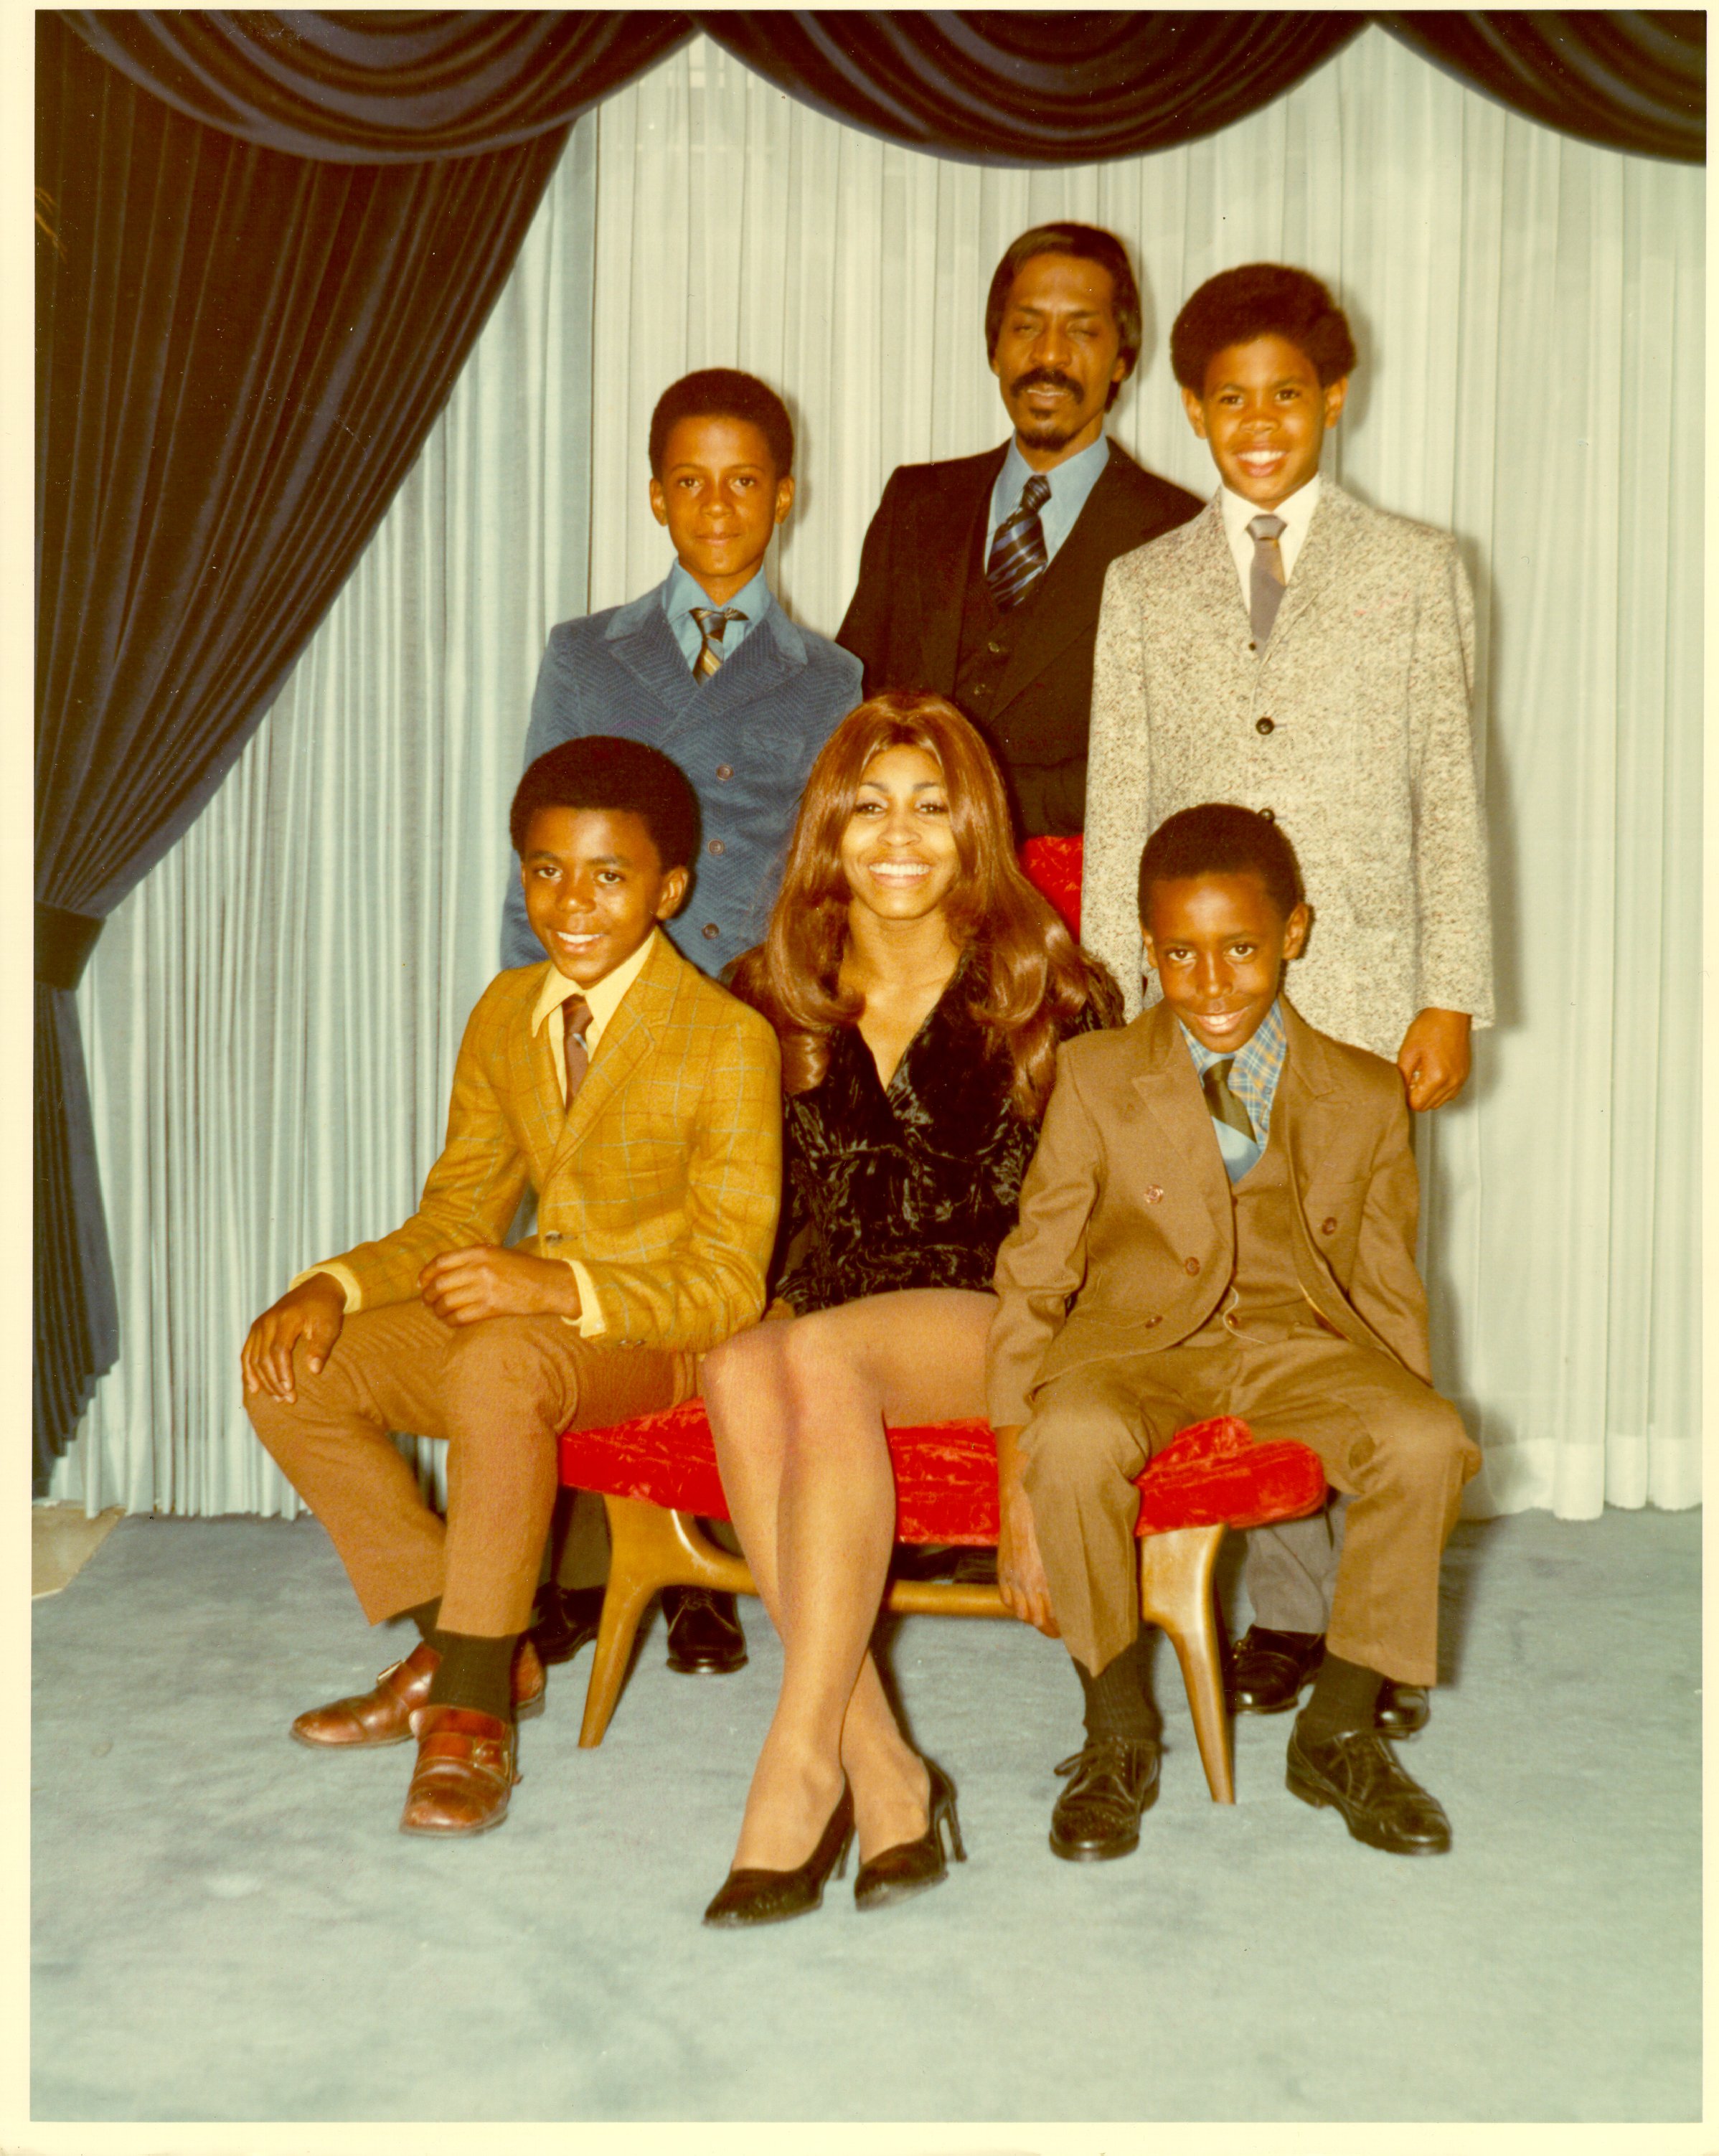 ke & Tina Turner pose for a portrait with their son and step-sons in circa 1972. Clockwise from bottom left: Michael Turner (Son of Ike & Lorraine Taylor), Ike Turner, Jr. (Son of Ike & Lorraine Taylor), Ike Turner, Craig Hill (Son of Tina & Raymond Hill), Ronnie Turner (Son of Ike & Tina) | Source: Getty Images 